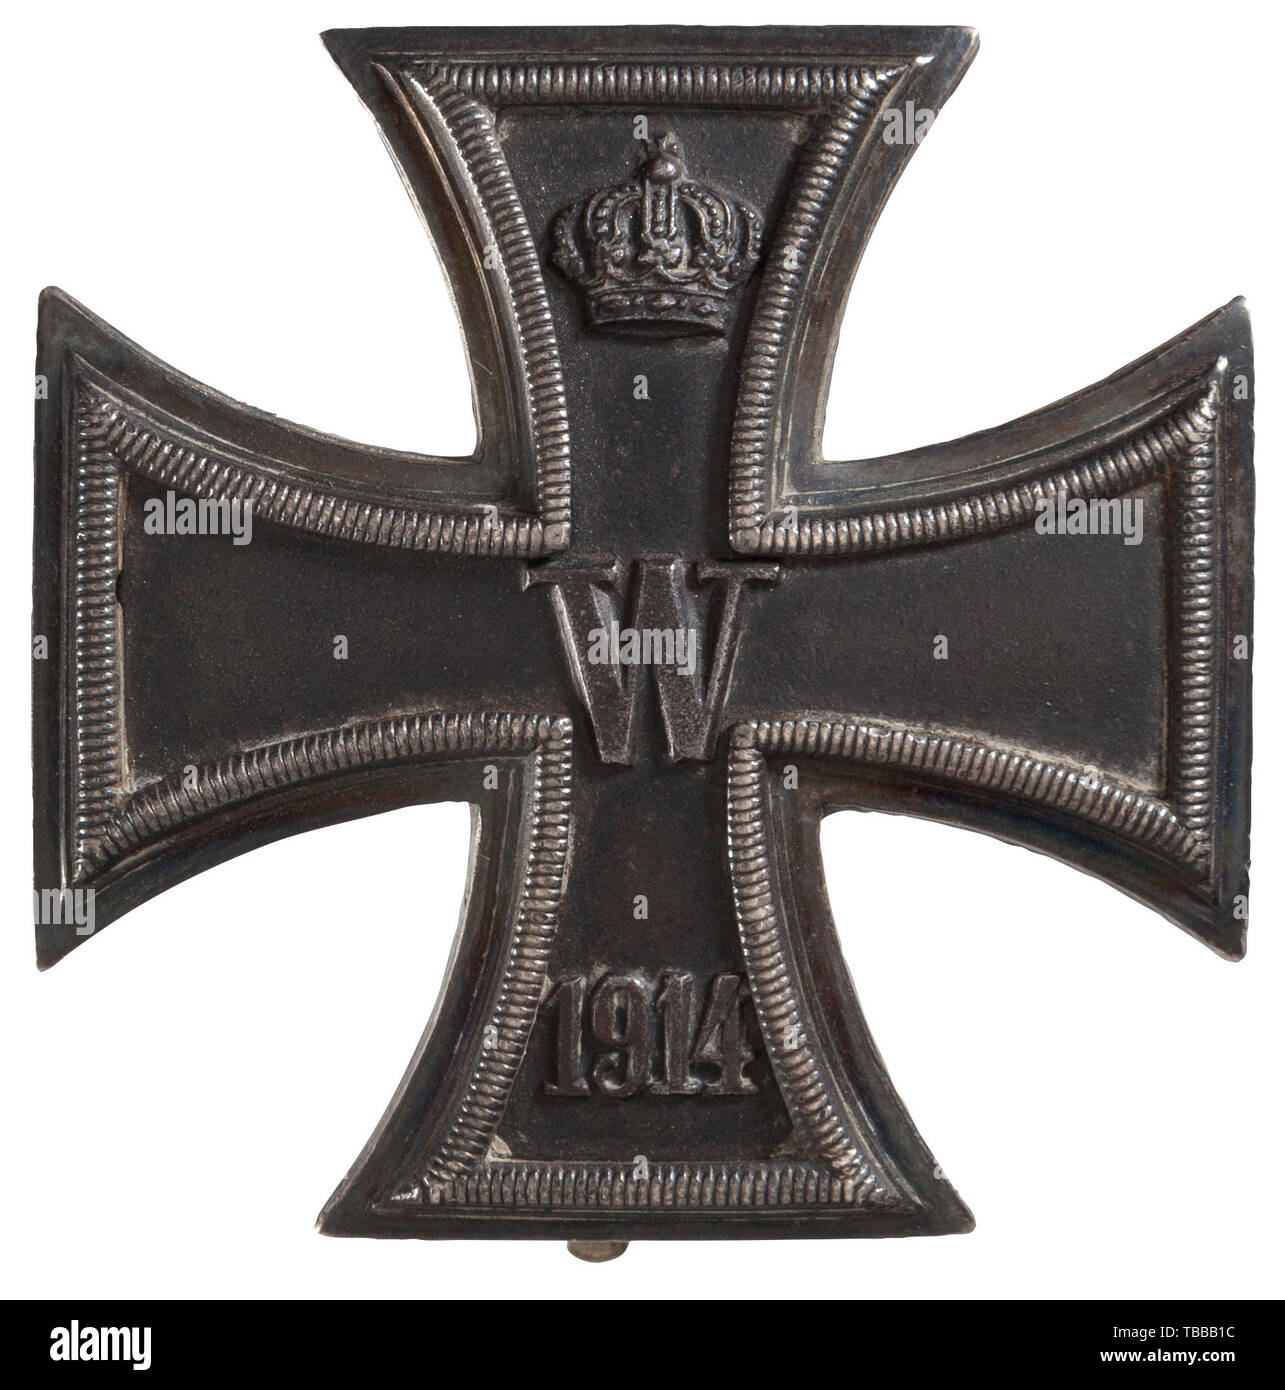 THE JOHN PEPERA COLLECTION, An Iron Cross 1914 1st Class with its Award Presentation Case, Silvered frame, iron core with well preserved paint, straight pin stamped '800' silver content. Black leatherette case with facsimile on lid., Editorial-Use-Only Stock Photo